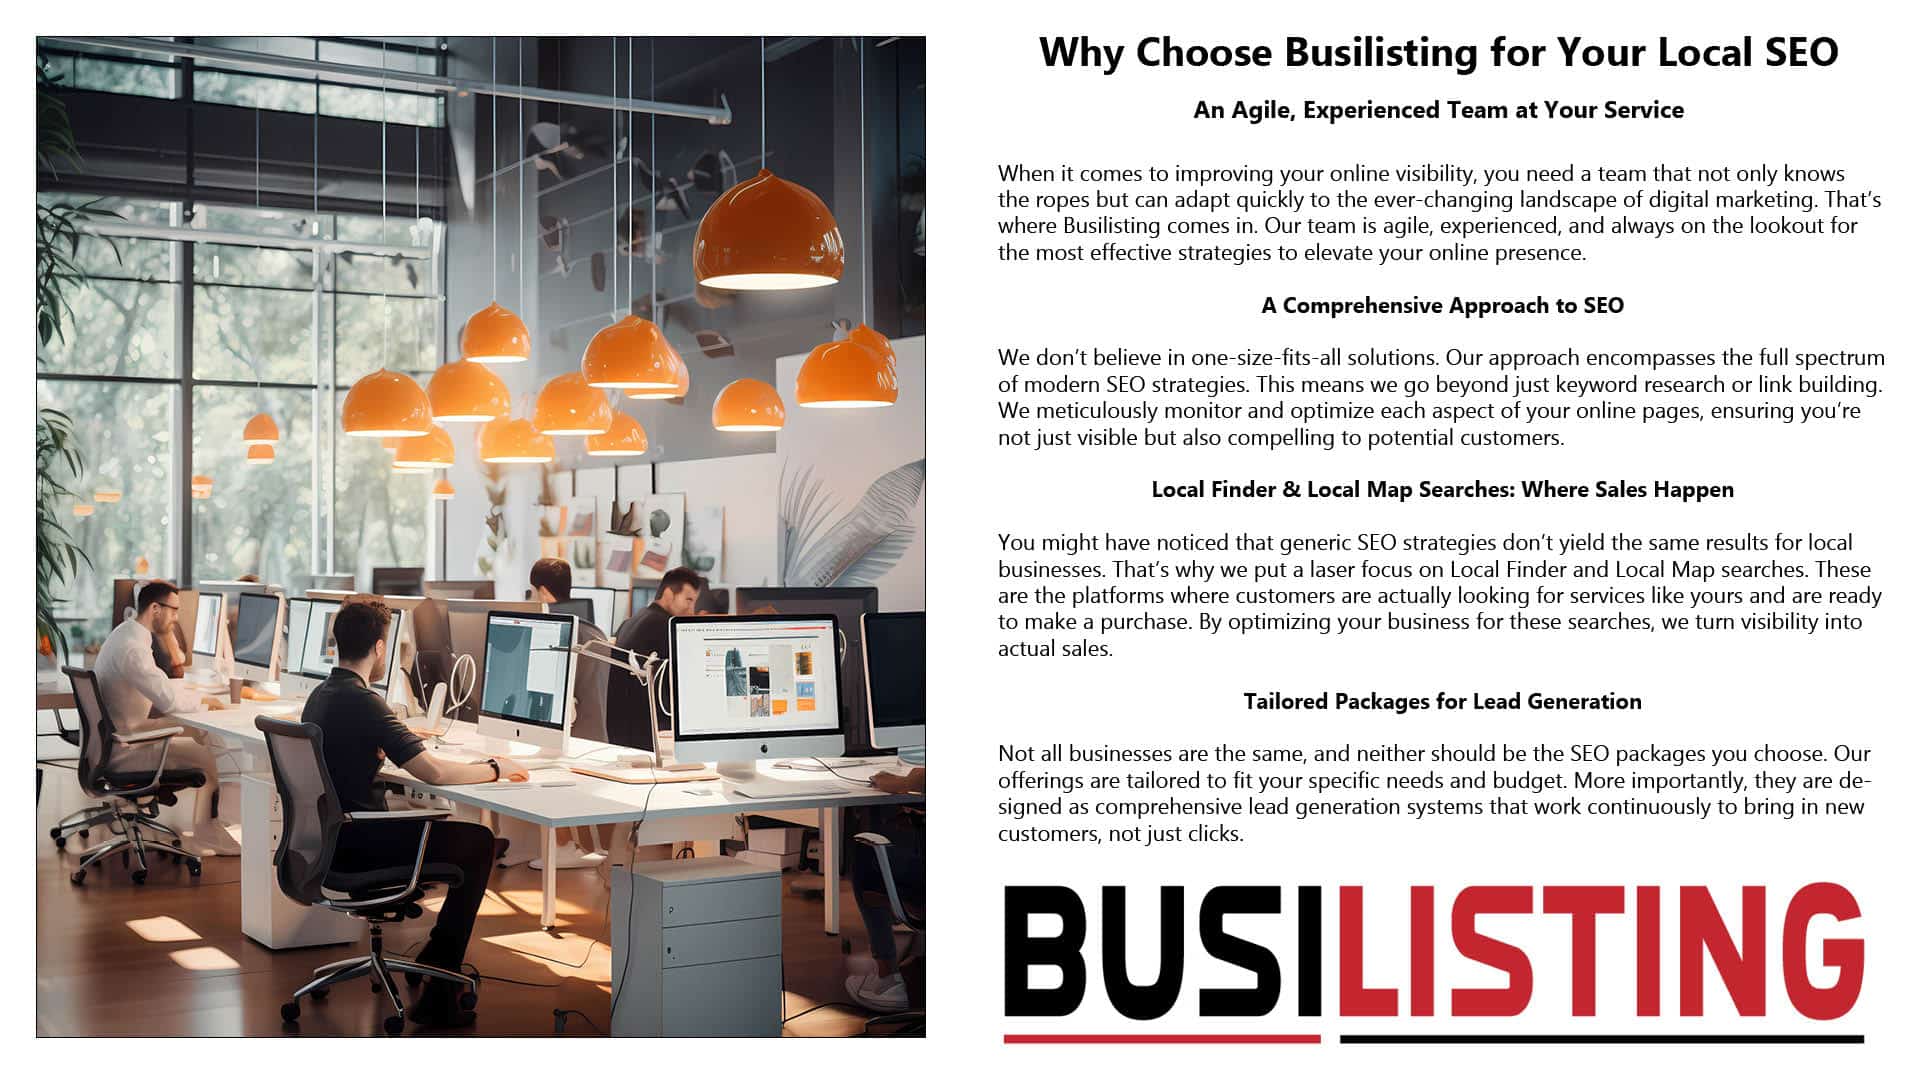 Here are four excellent reasons to choose Busilisting as your Local SEO Company